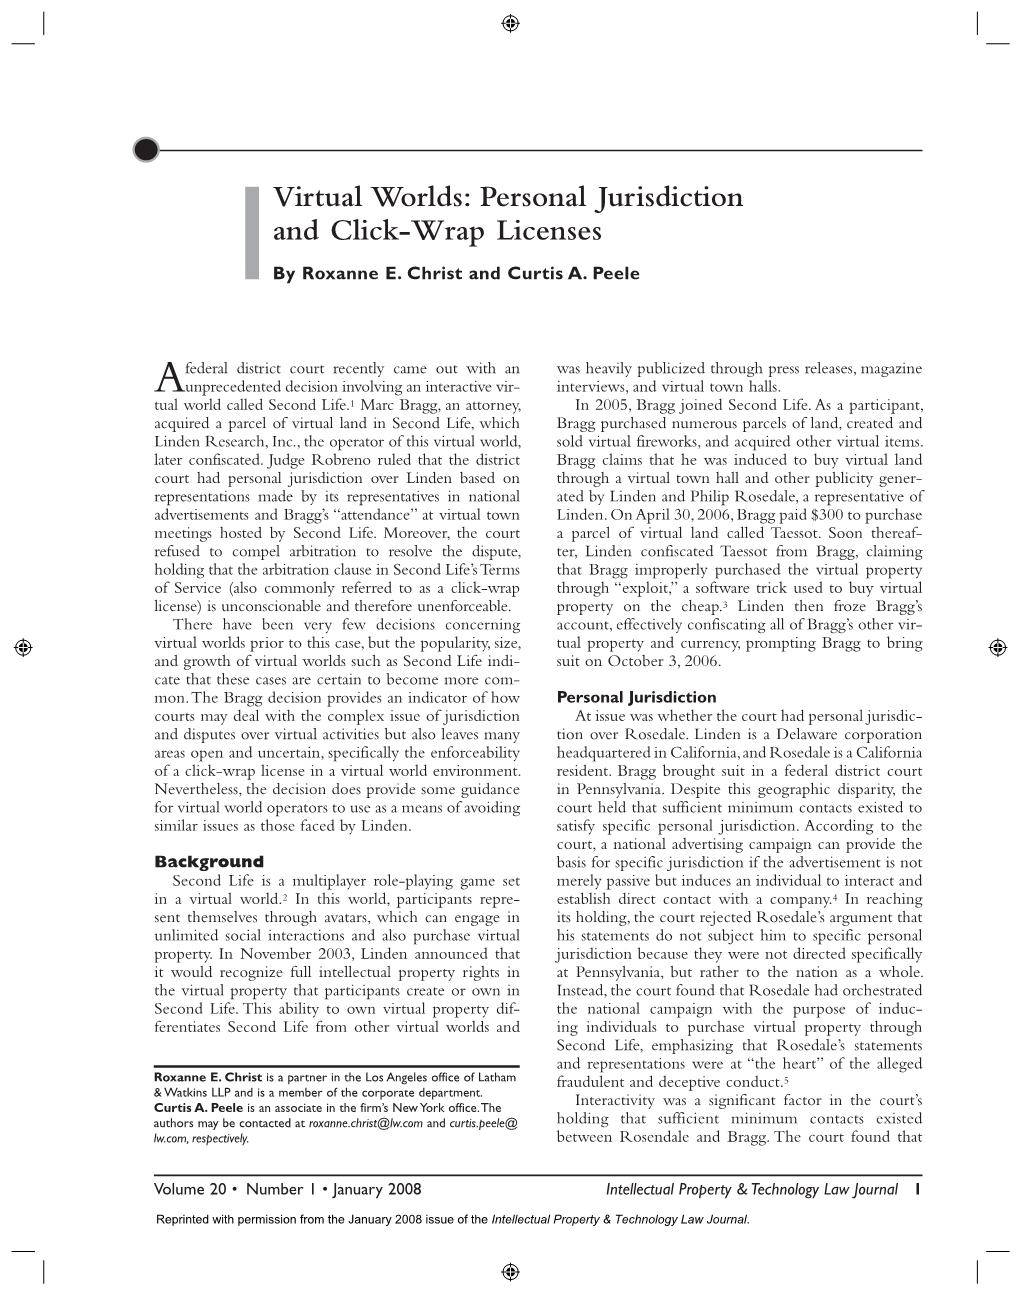 Virtual Worlds: Personal Jurisdiction and Click-Wrap Licenses